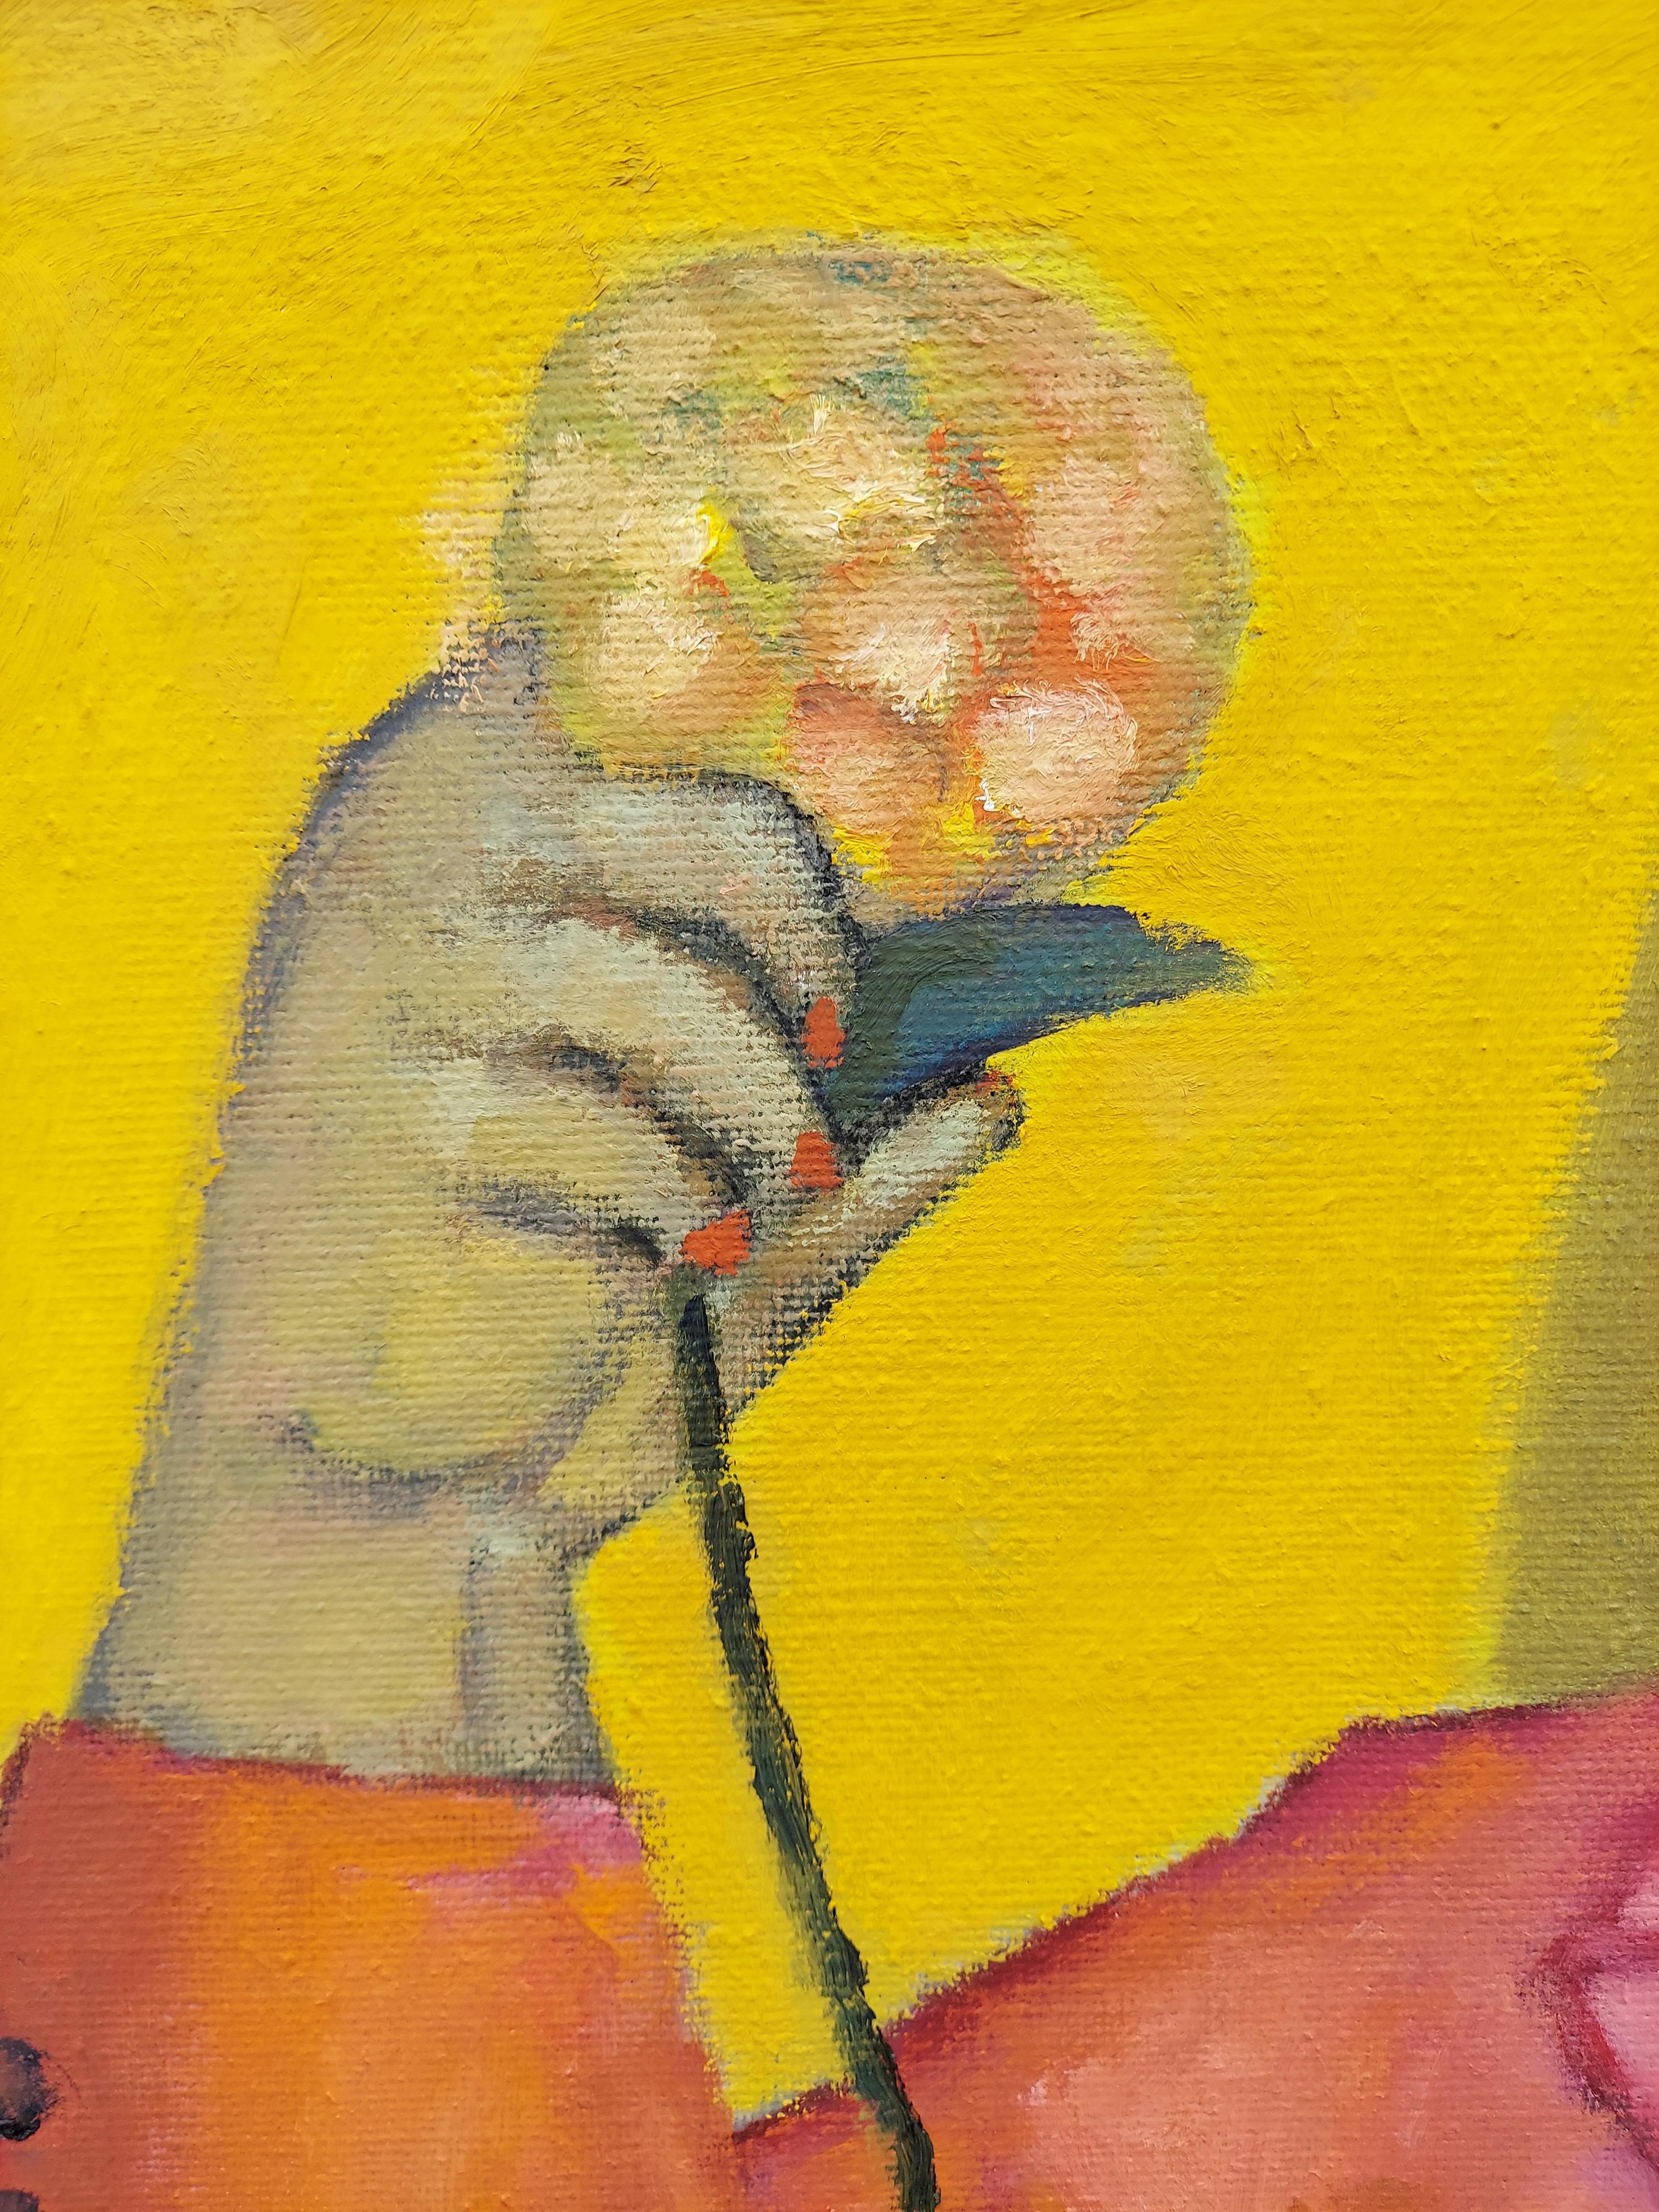 The Yellow Bouquet seated female figure with flowers soft yellow and pink - Expressionist Painting by Stephen Basso